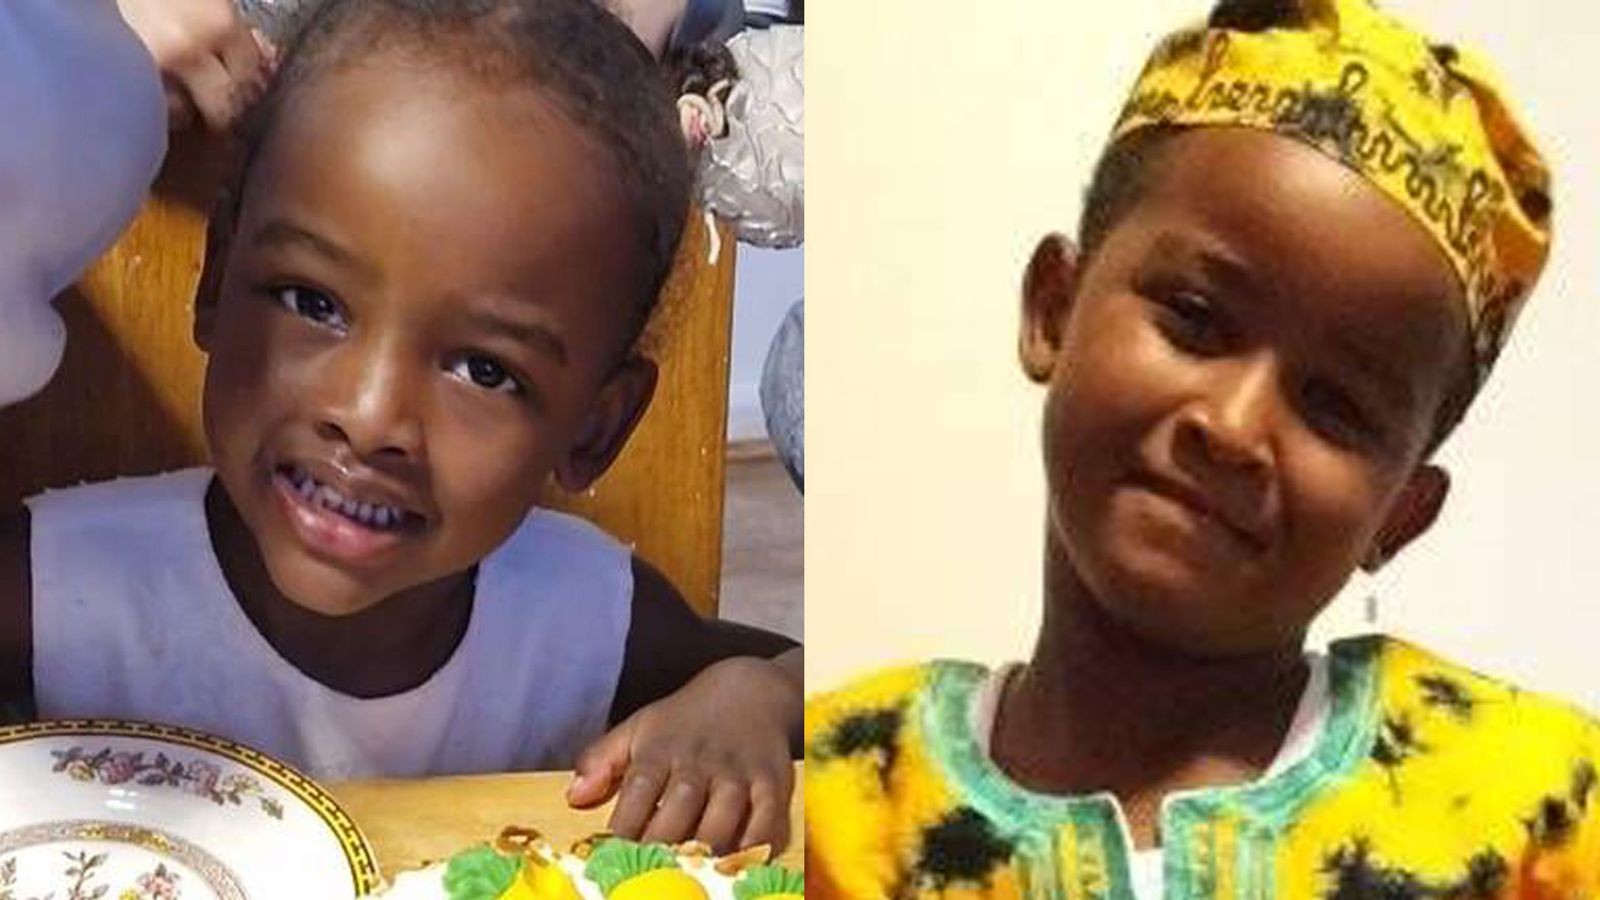 First images of children found dead at home in Bristol